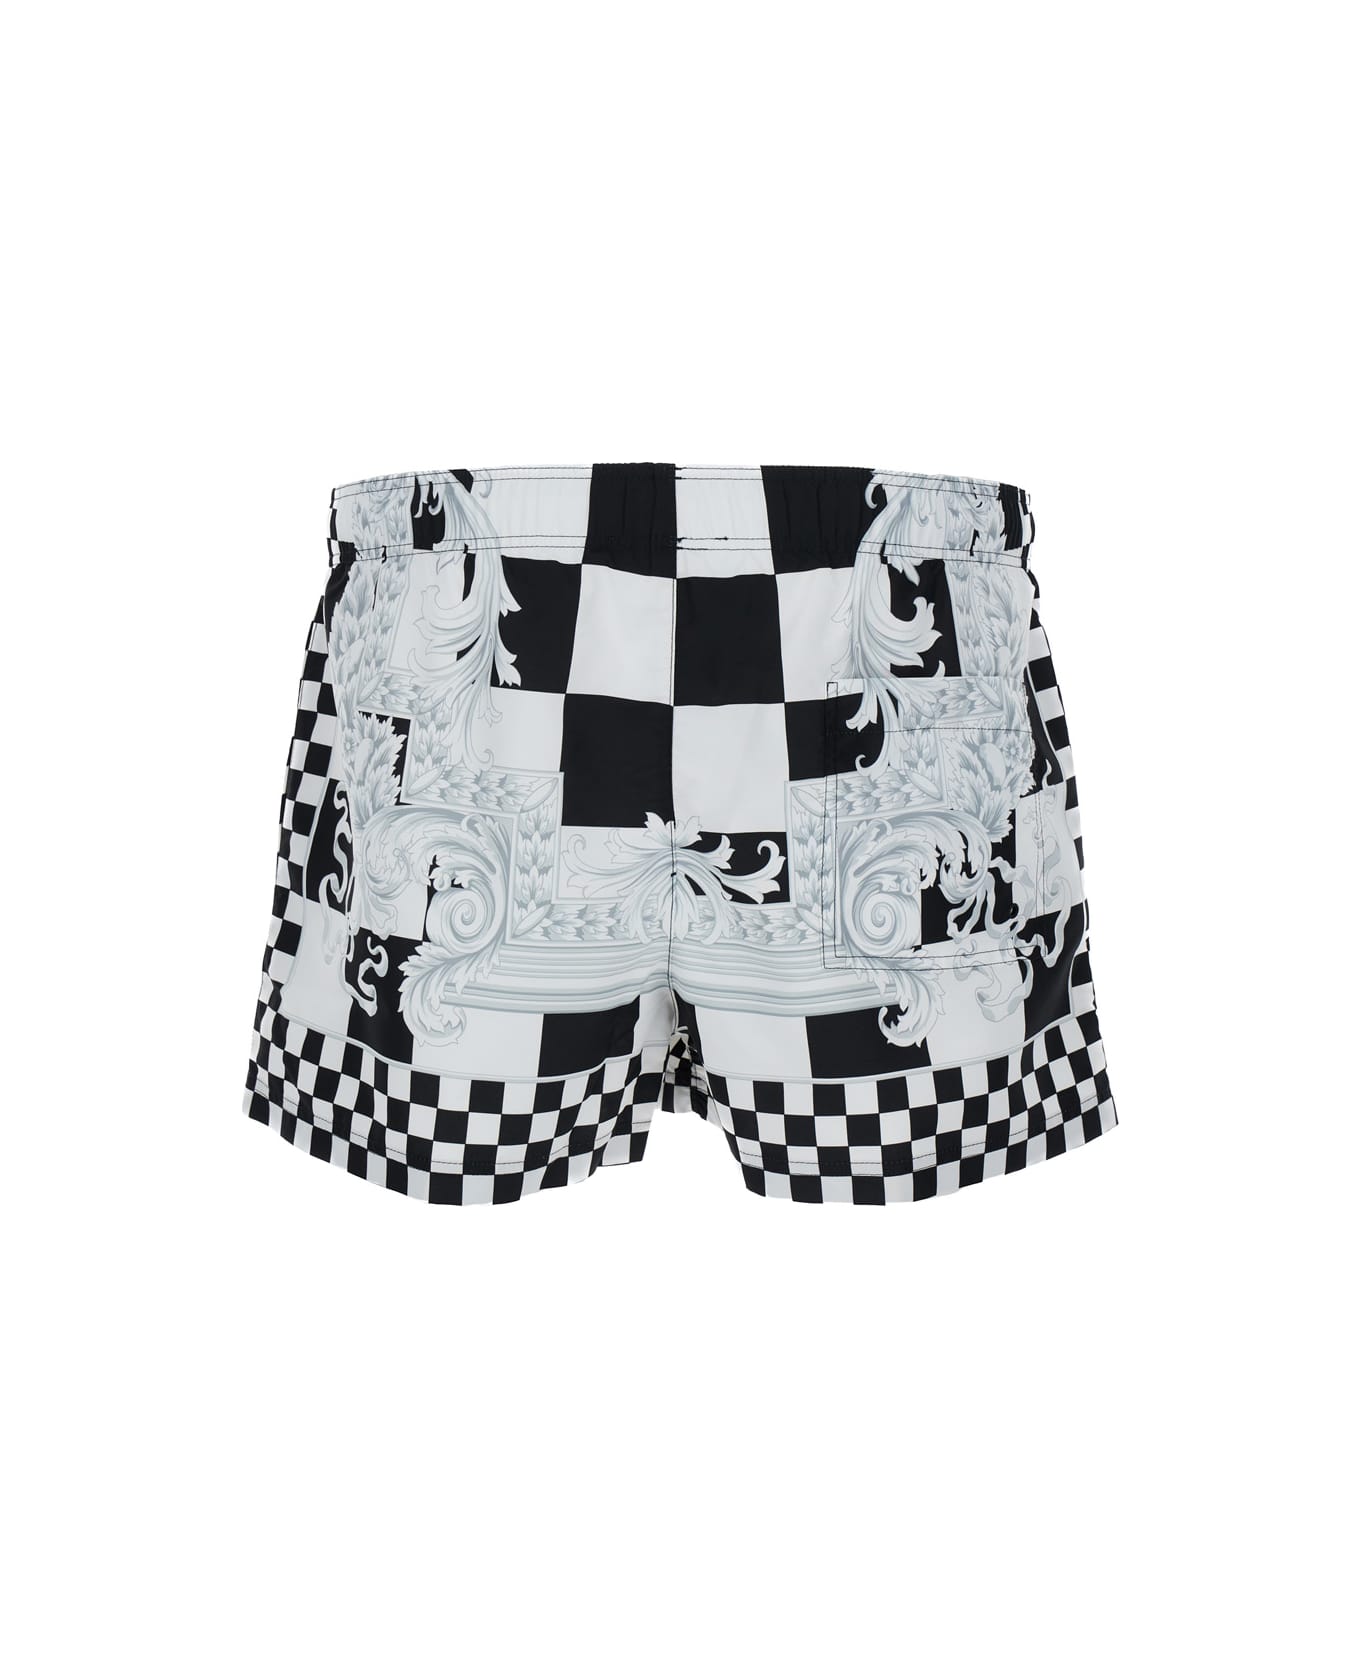 Versace Light Blue And Black Swim Trunks With Nautical Barocco Print In Tech Fabric Man - White